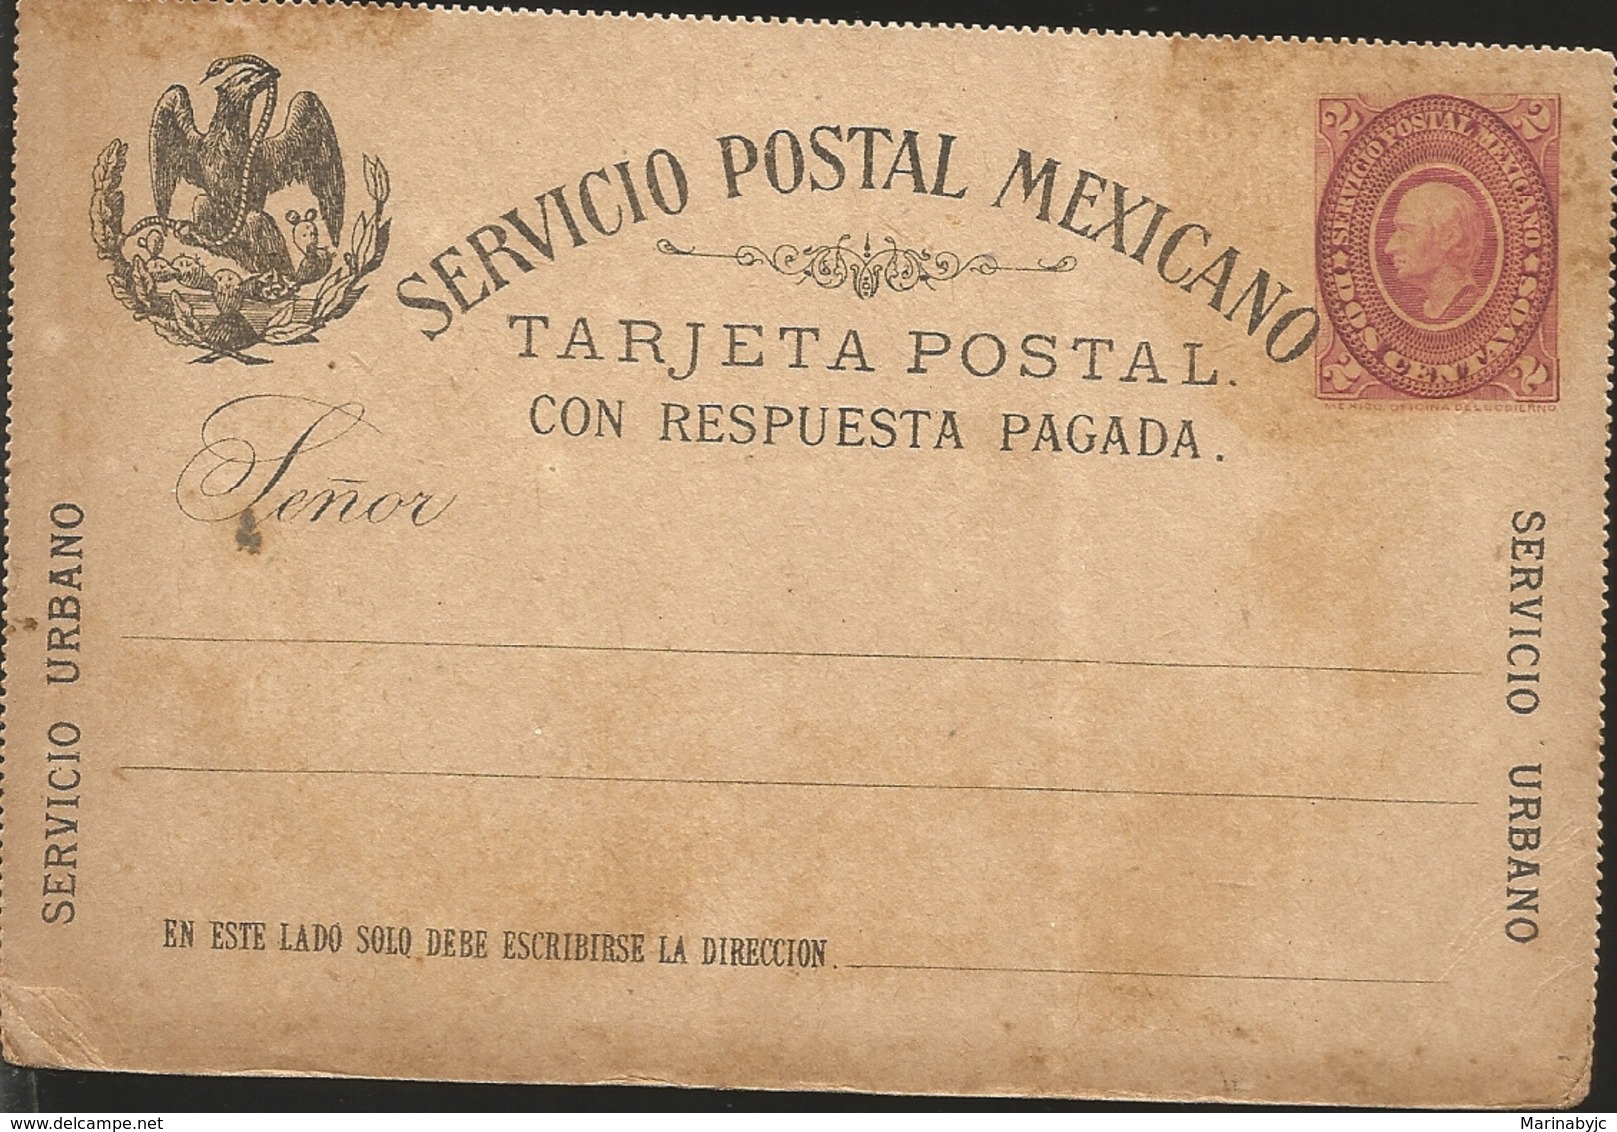 J) 1888 MEXICO, MEXICAN POSTAL SERVICE, EAGLE, URBAN SERVICE, POSTCARD WITH PAID RESPONSE, POSTAL STATIONARY - Mexico